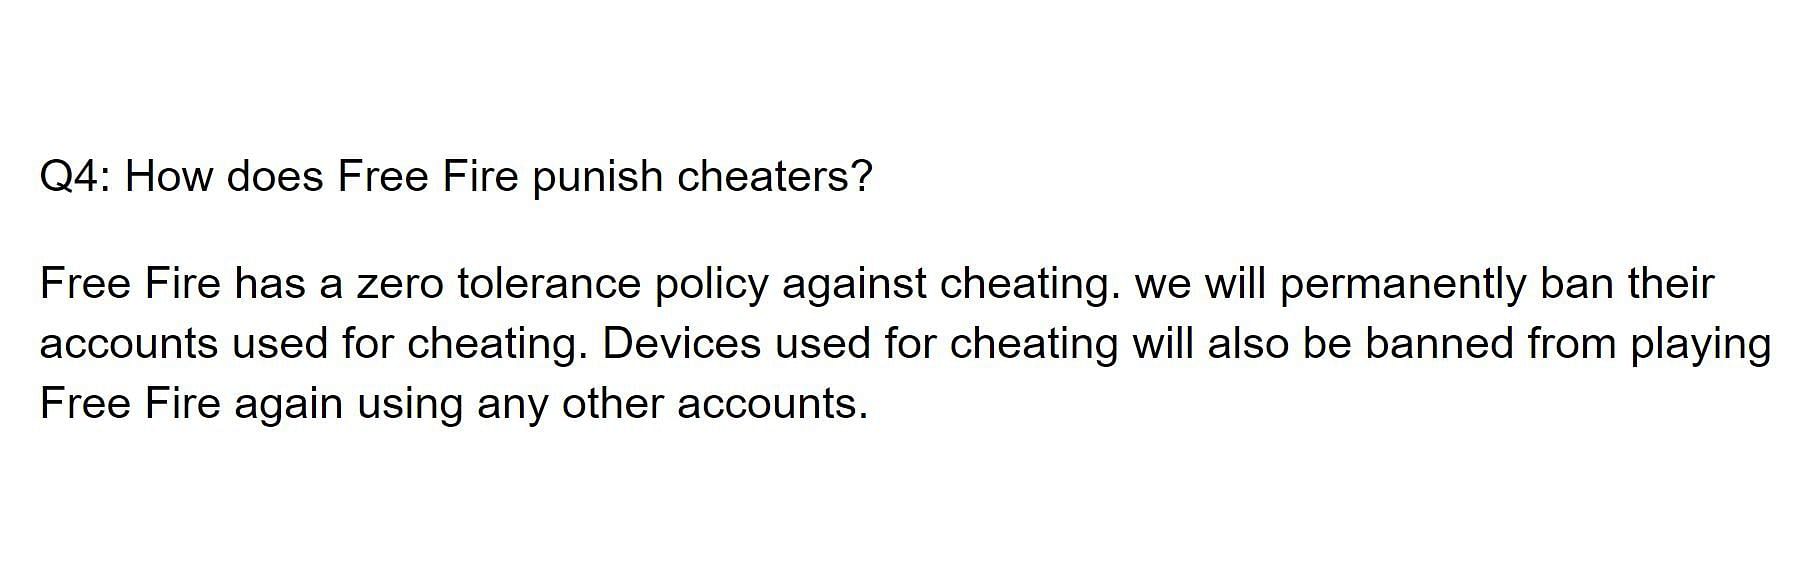 This is what the developers have mentioned as the punishment for cheating (Image via Free Fire)